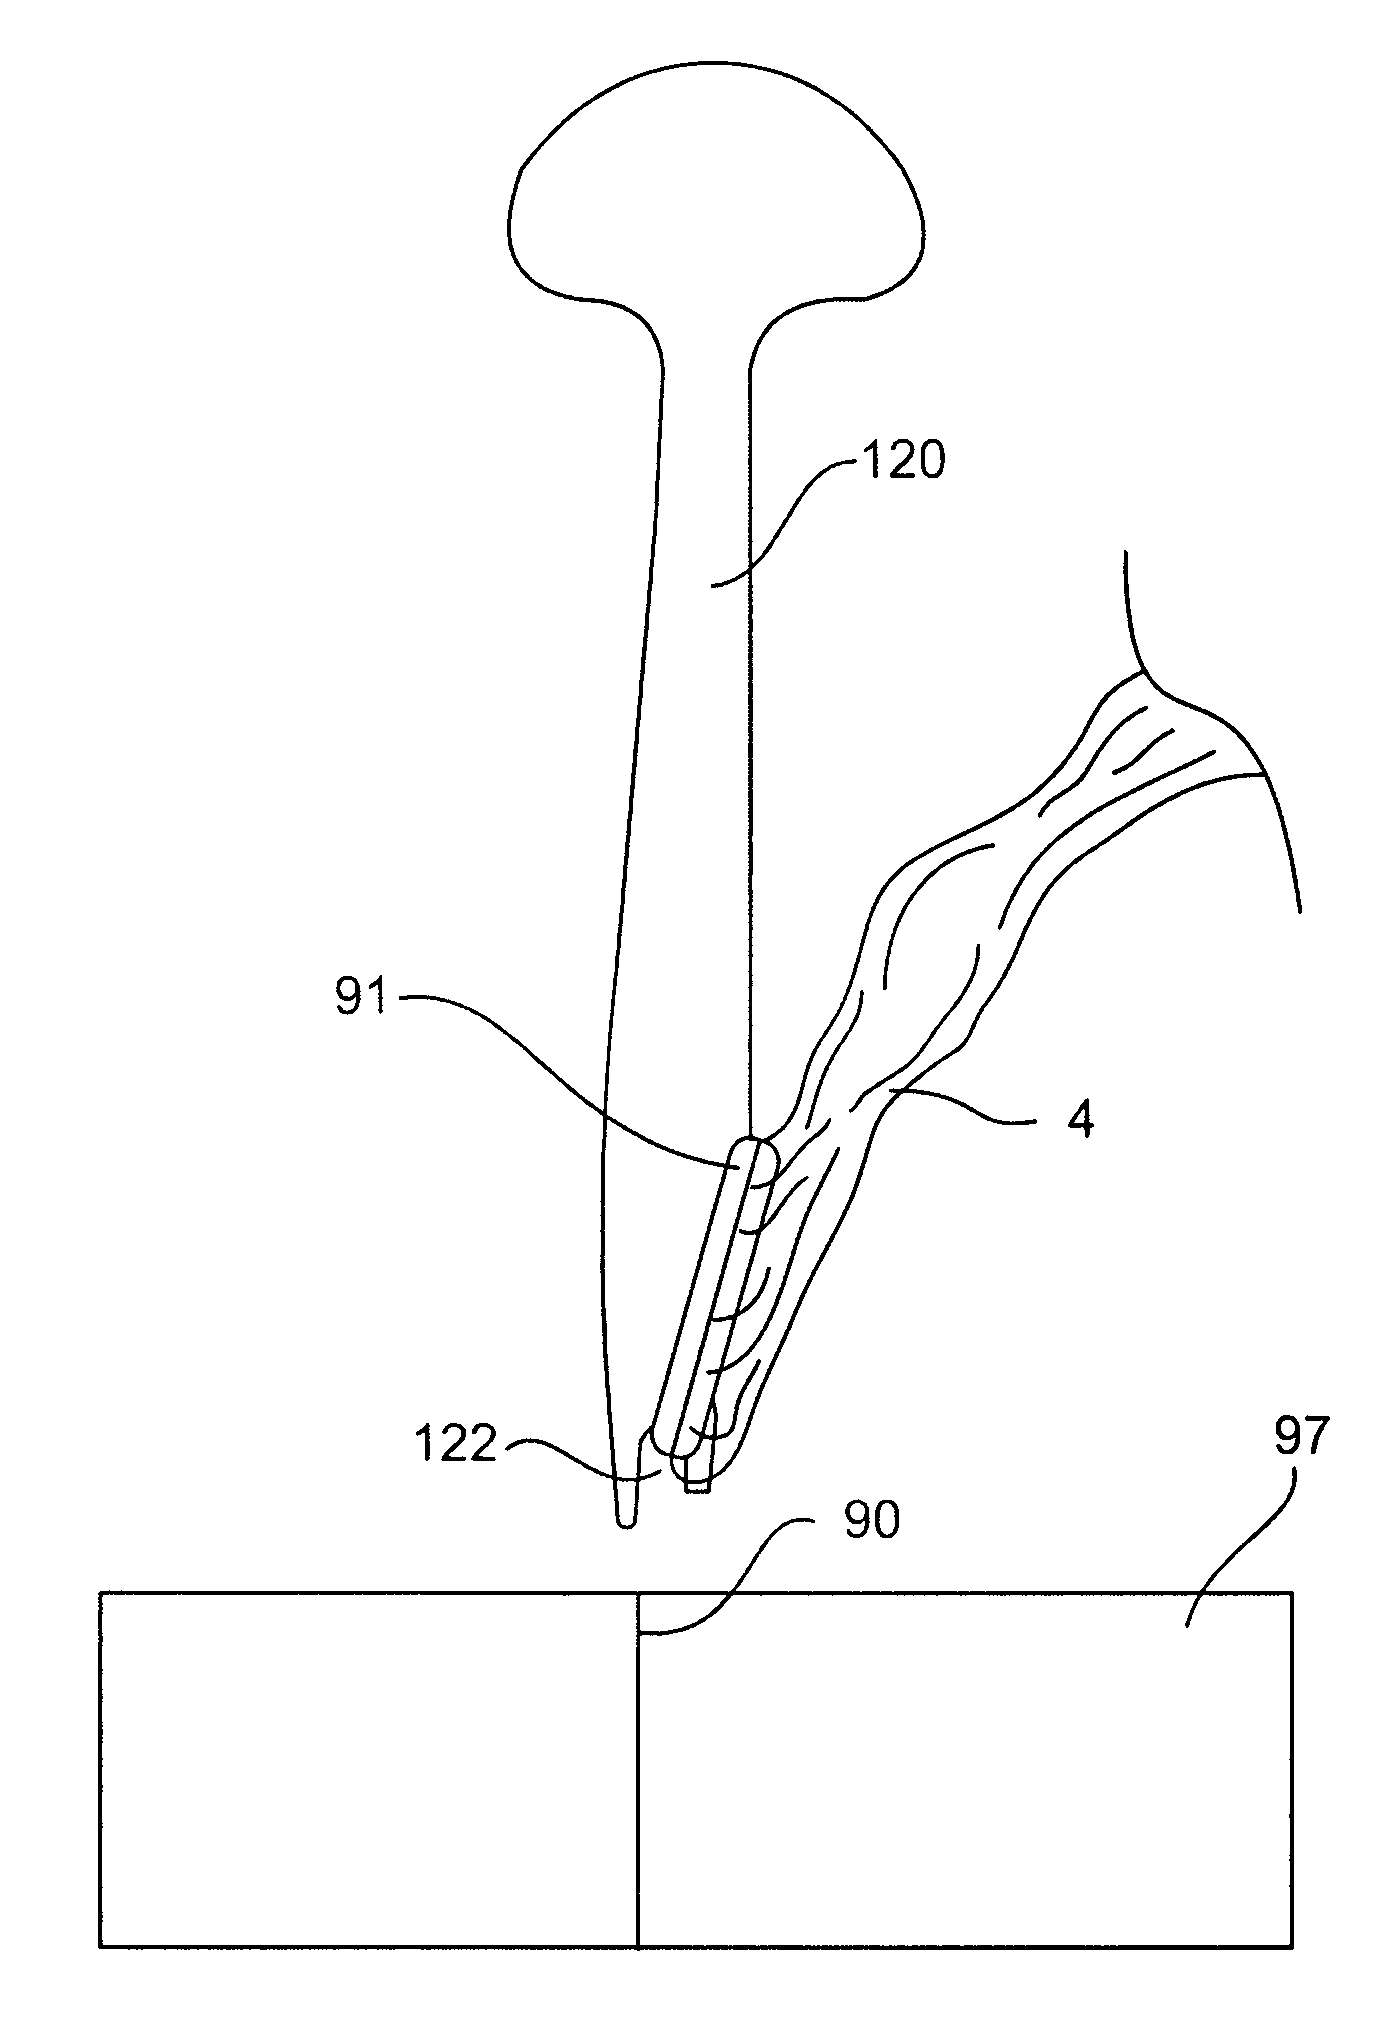 Wound retractor system